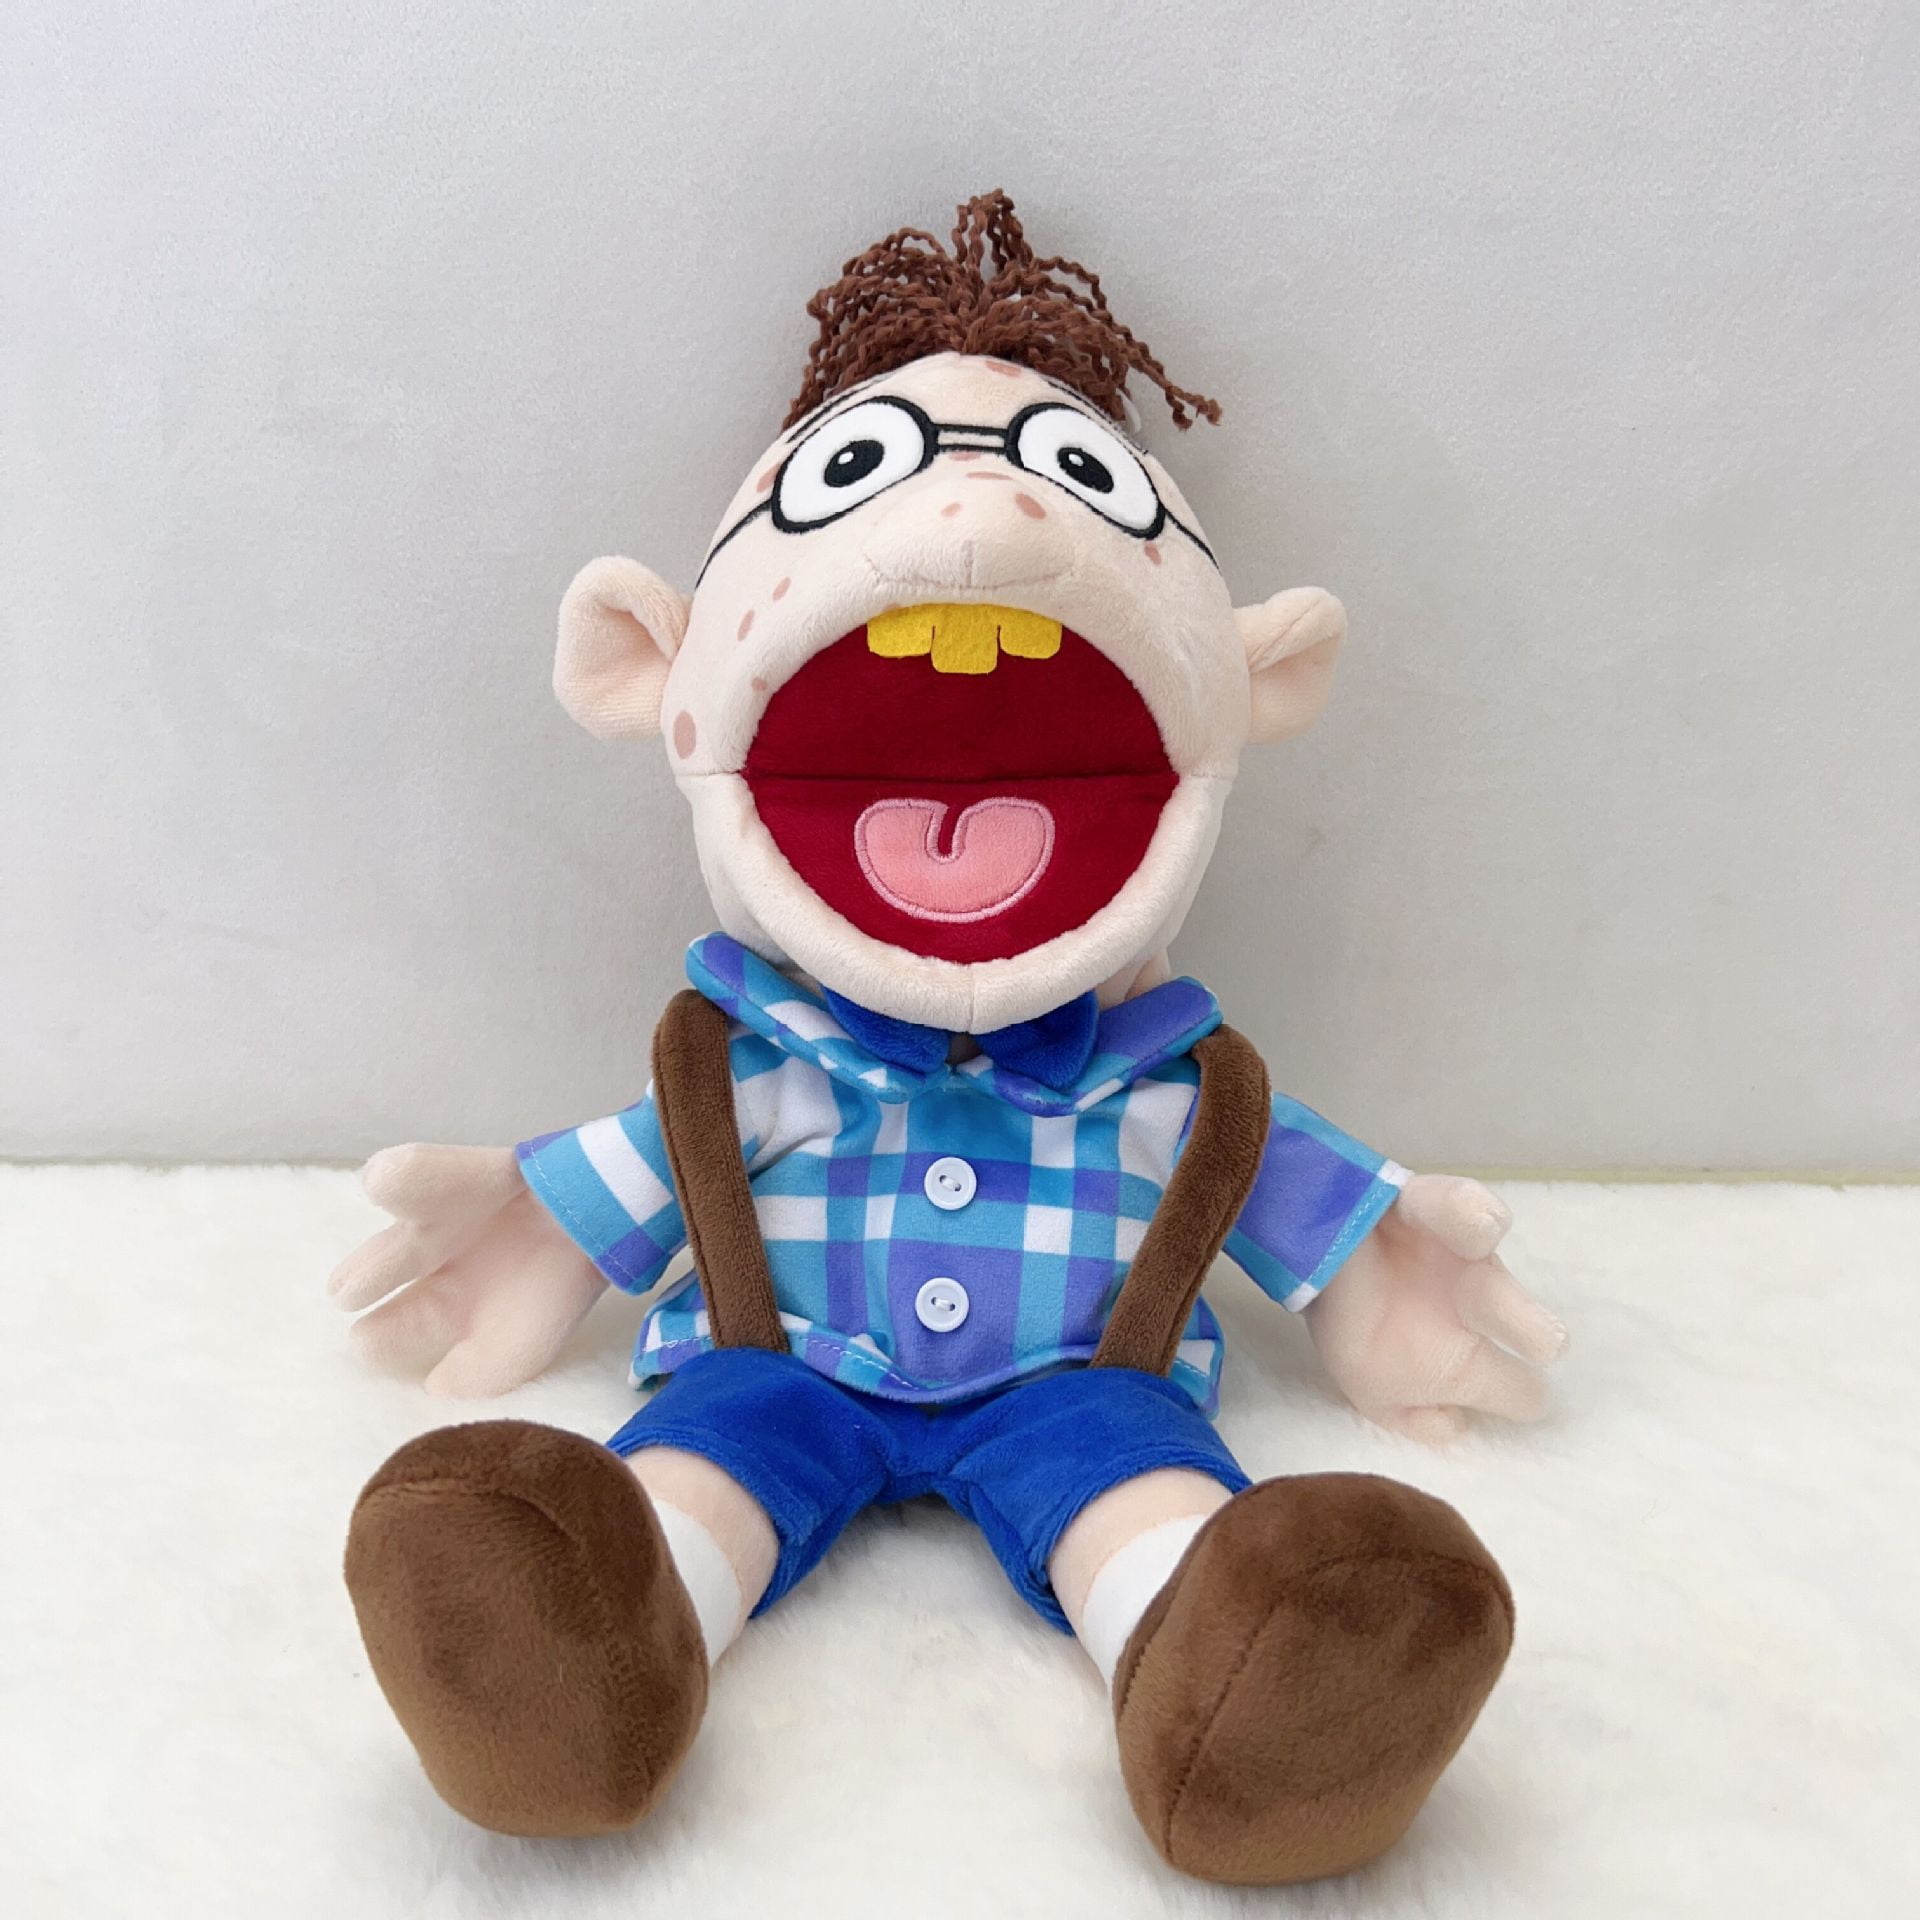 Jeffy Puppet Plush Toy, Jeffy Sister/Mom/Dad Soft Plush Toy, Hand Puppet  for Play House, Mischievous Funny Puppet's Toy with Working Mouth, Kid's